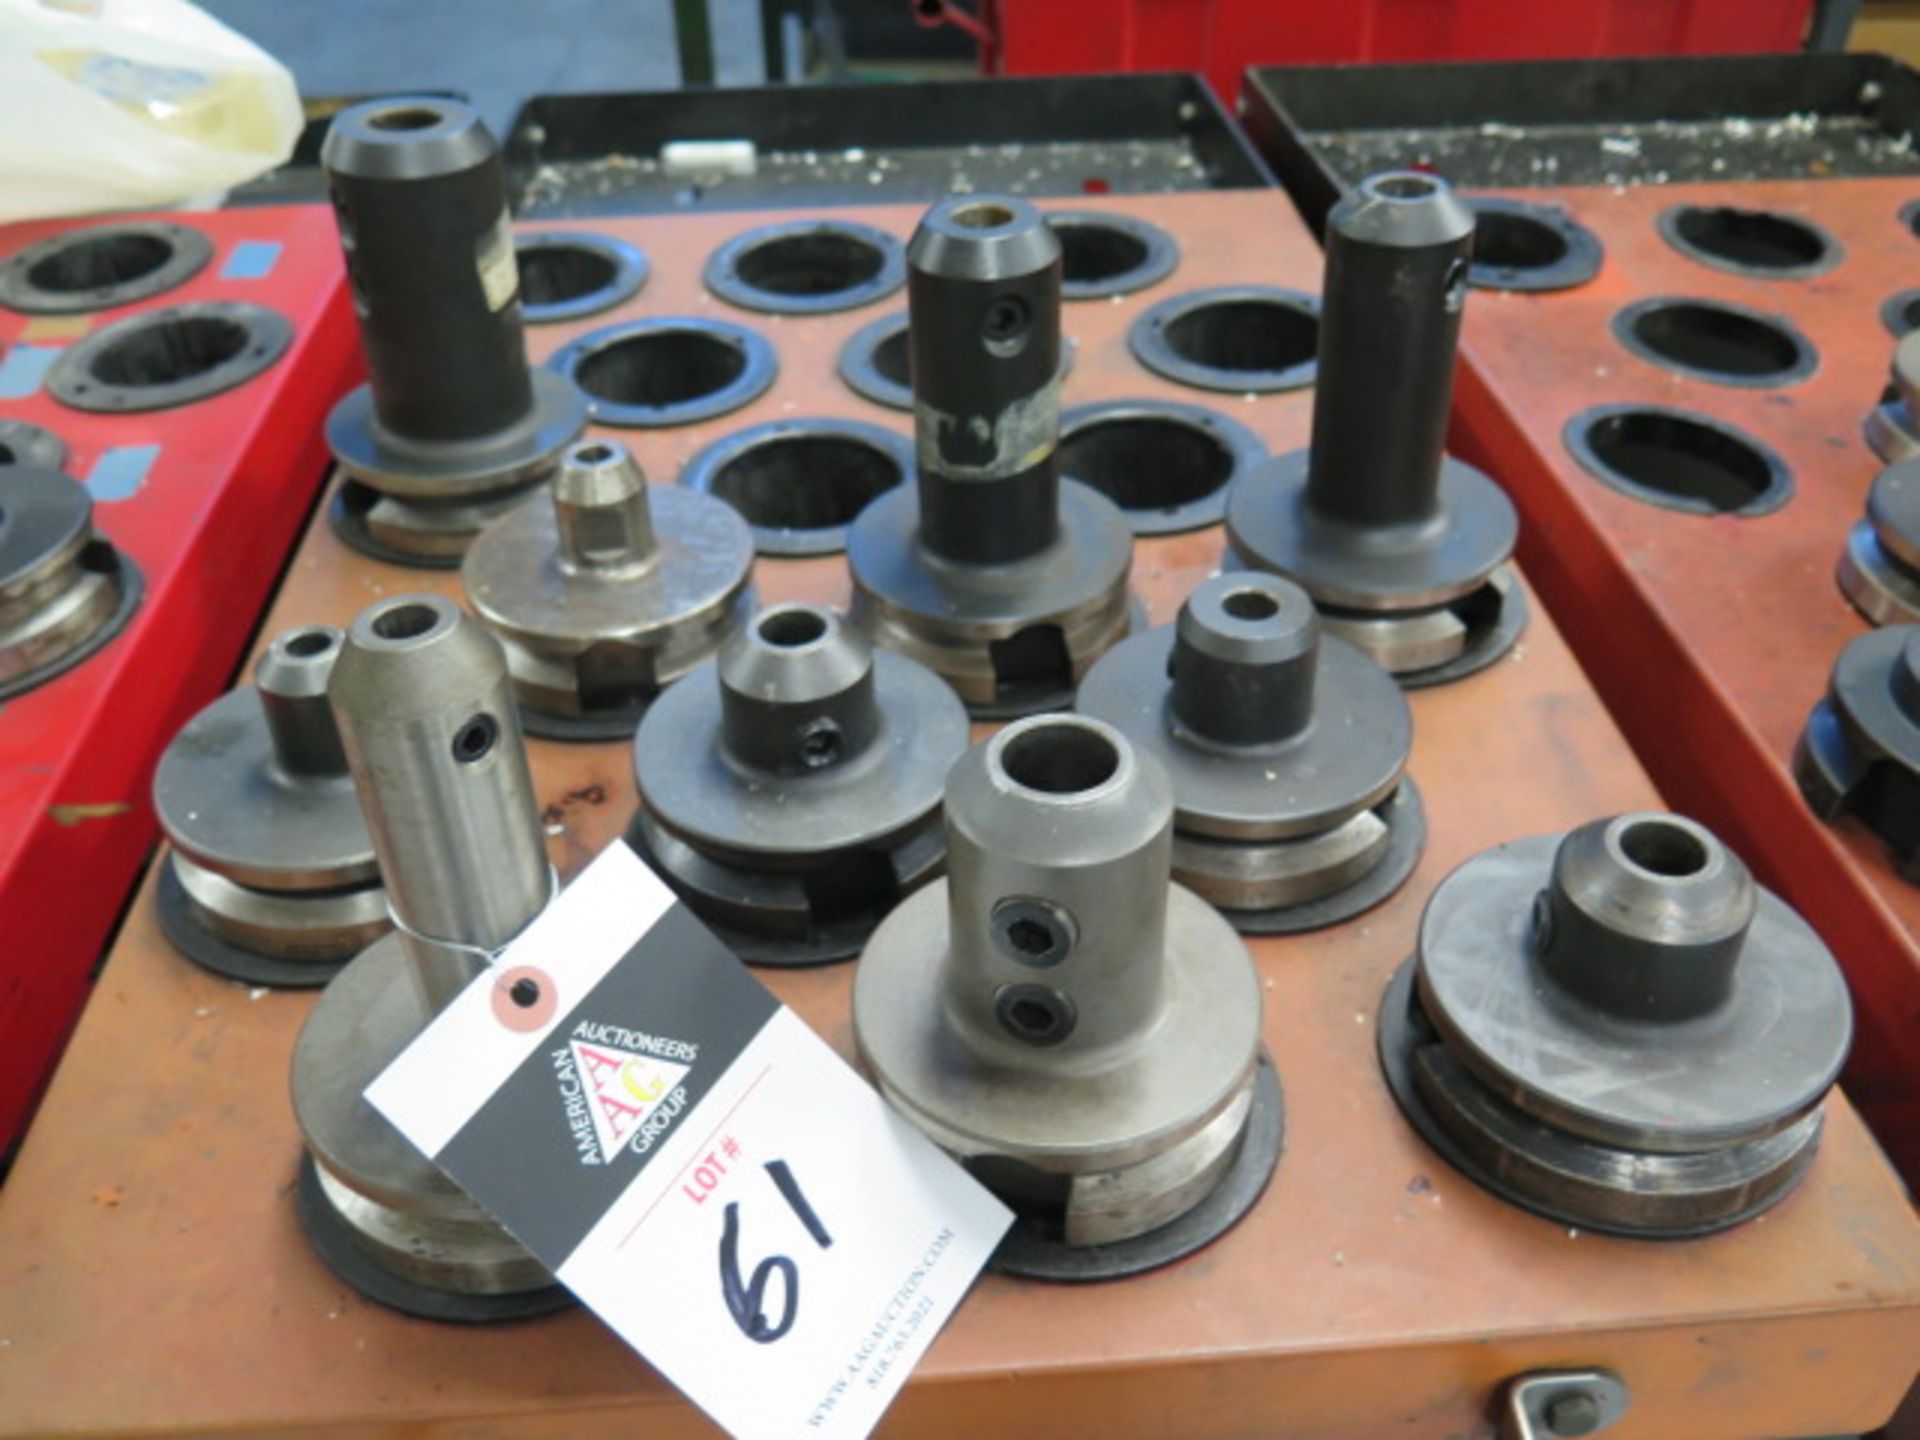 BT-50 Taper Tooling (10) (SOLD AS-IS - NO WARRANTY) (Located @ 2229 Ringwood Ave. San Jose)